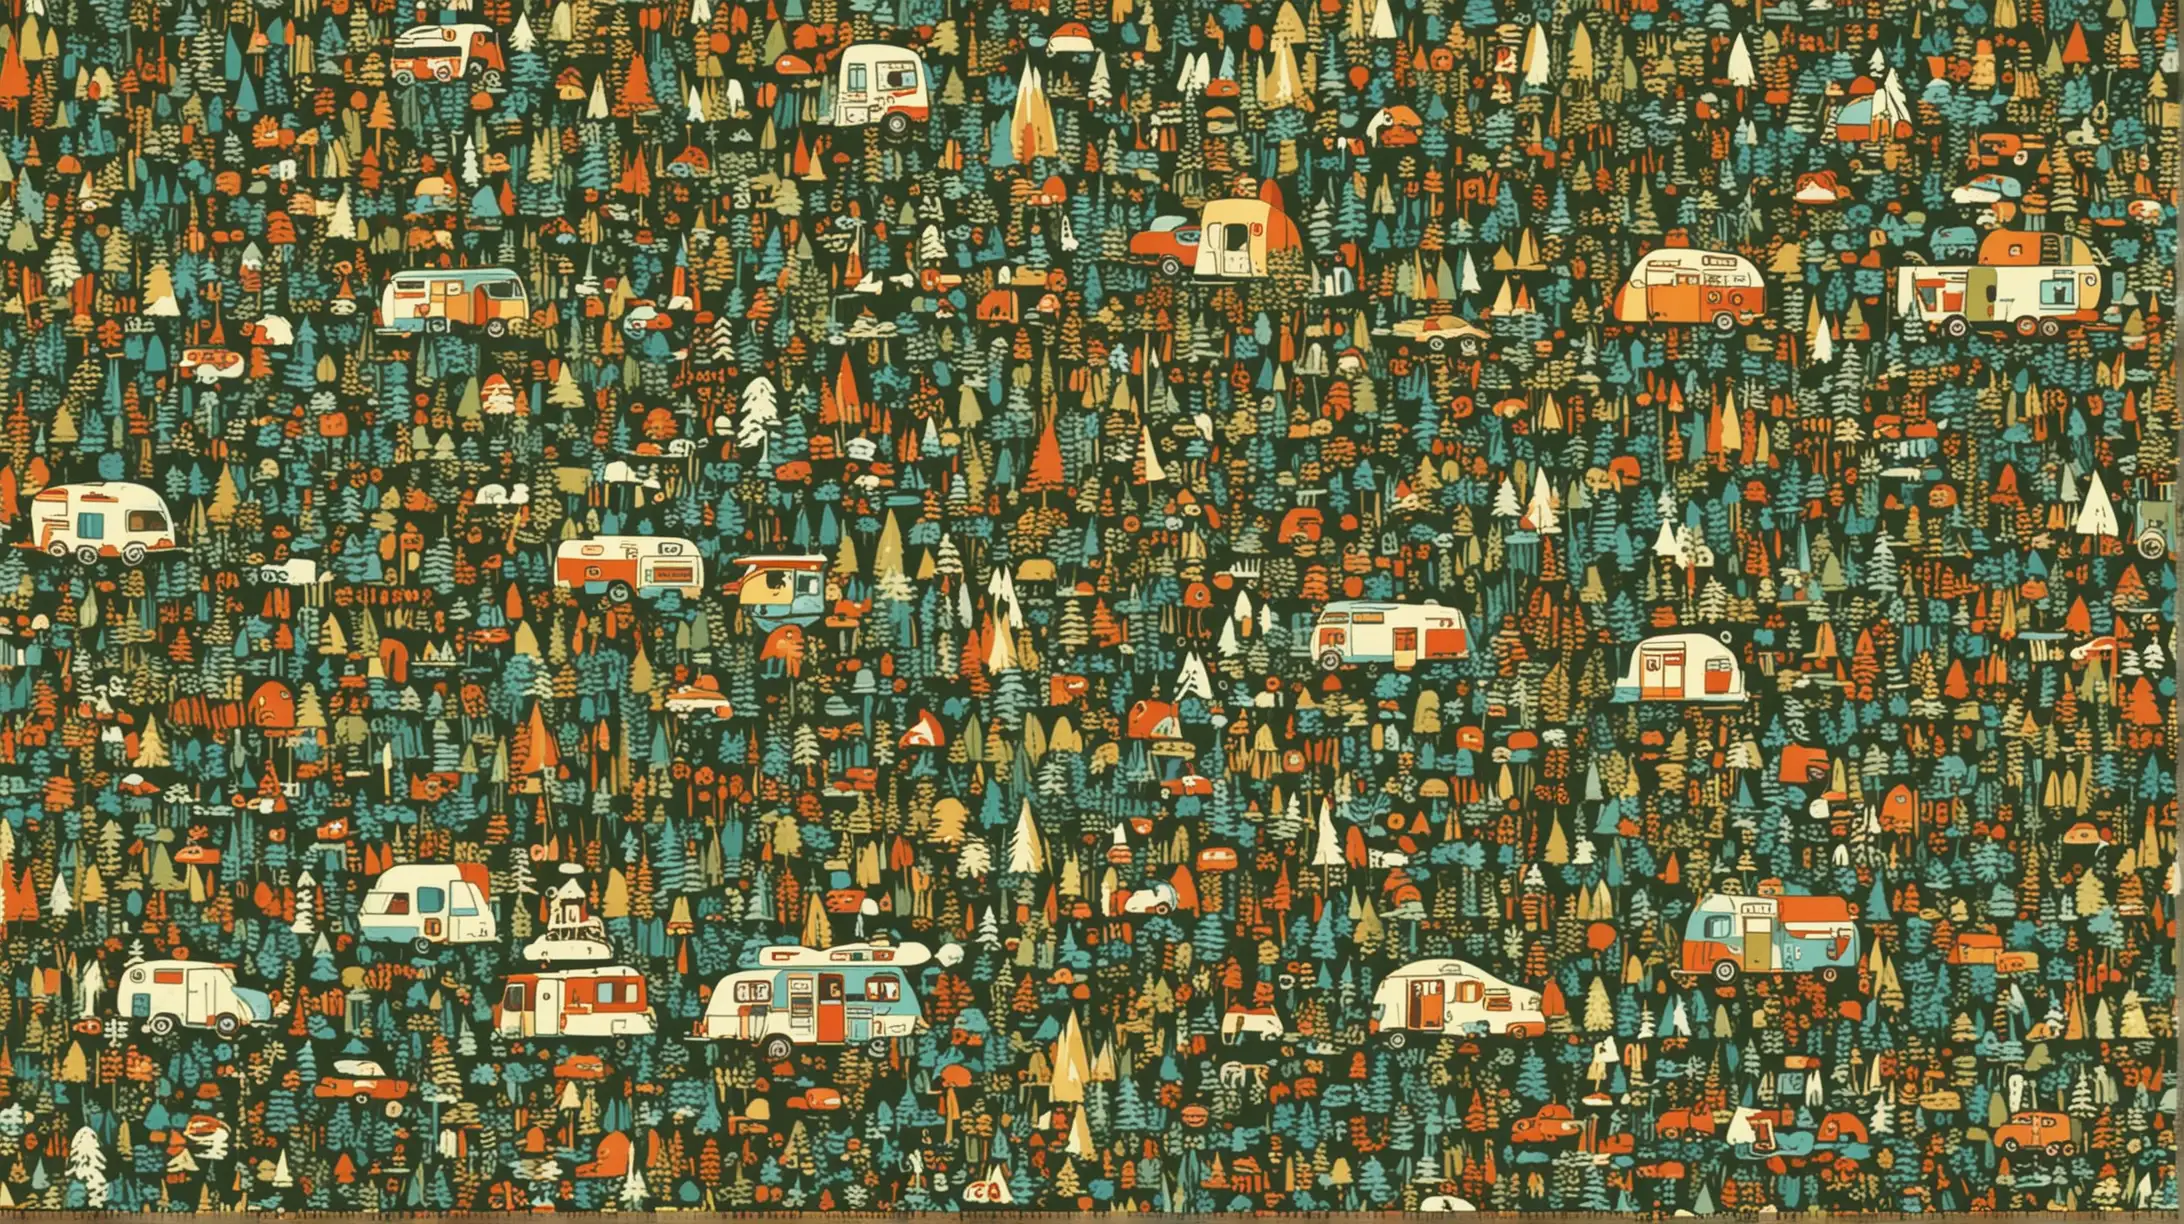 give me a layout of a 1960's wallpaper design with camping 